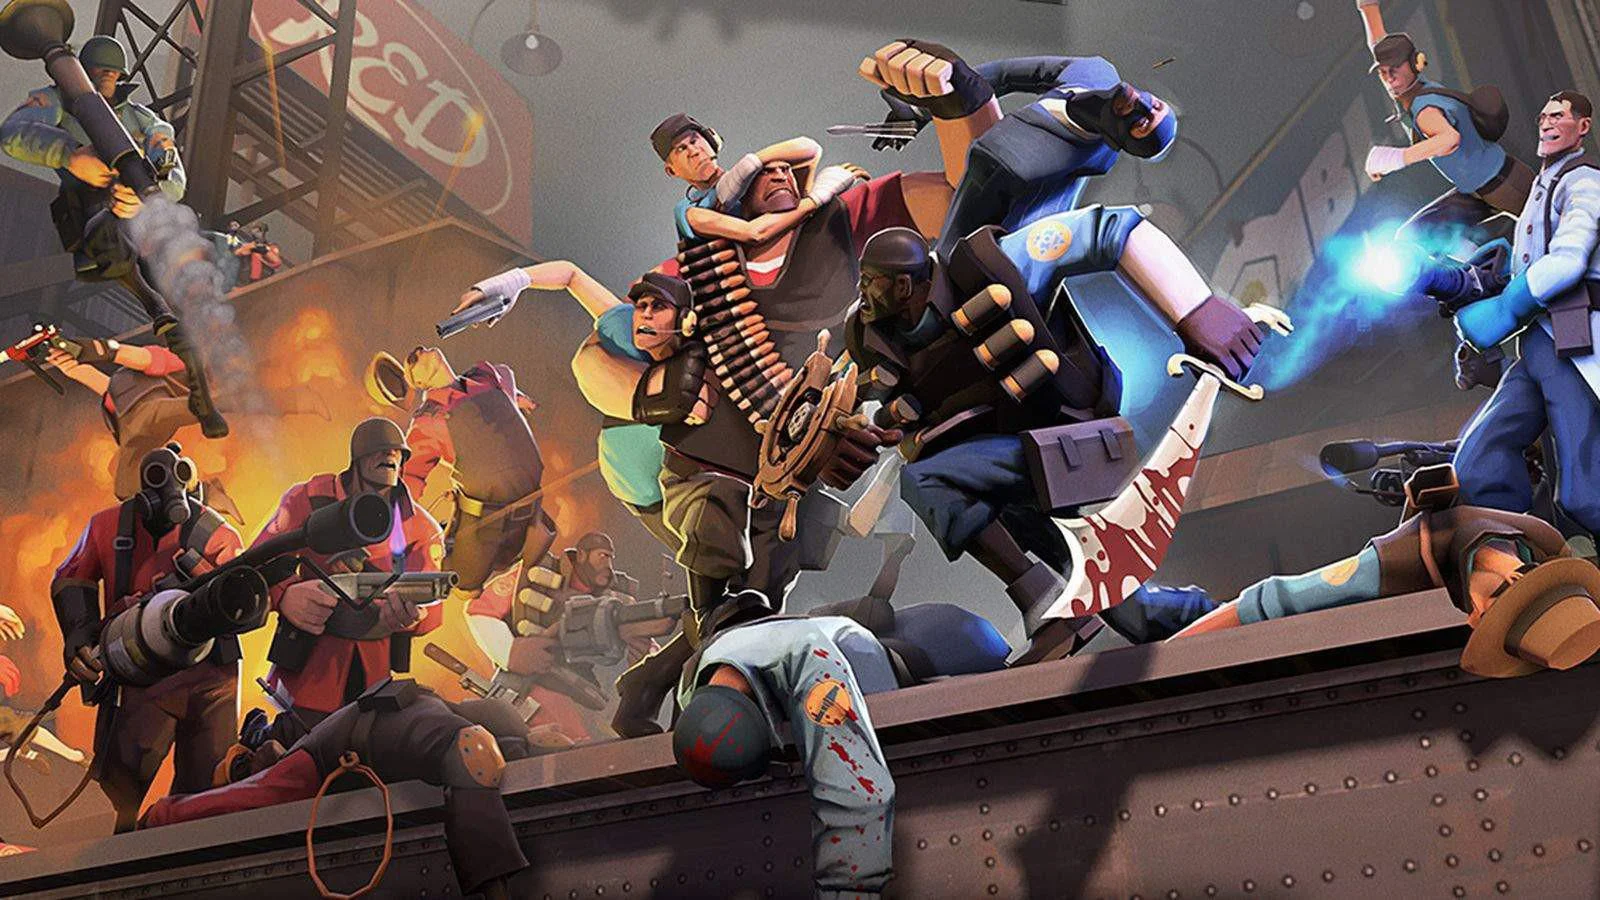 Team Fortress 2 has received a major update. At the same time, Valve has nothing to do with it.